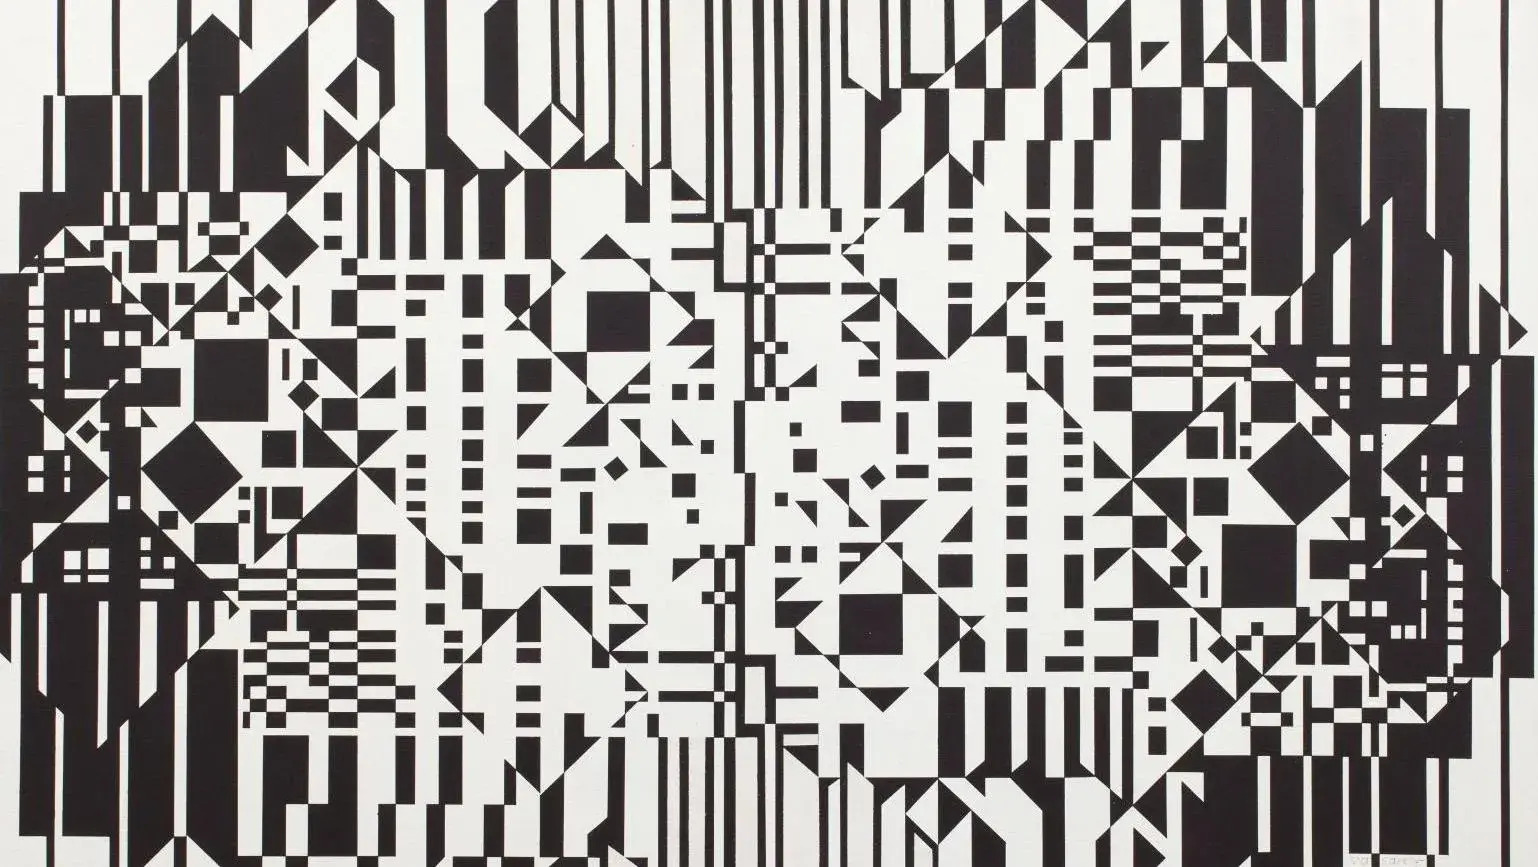 Victor Vasarely (1906-1997), Bi-Syrom, 1956/76, acrylic on canvas, 71 x 108 cm/27.95 x 42.51 in (detail). Estimate: €80,000/120,000